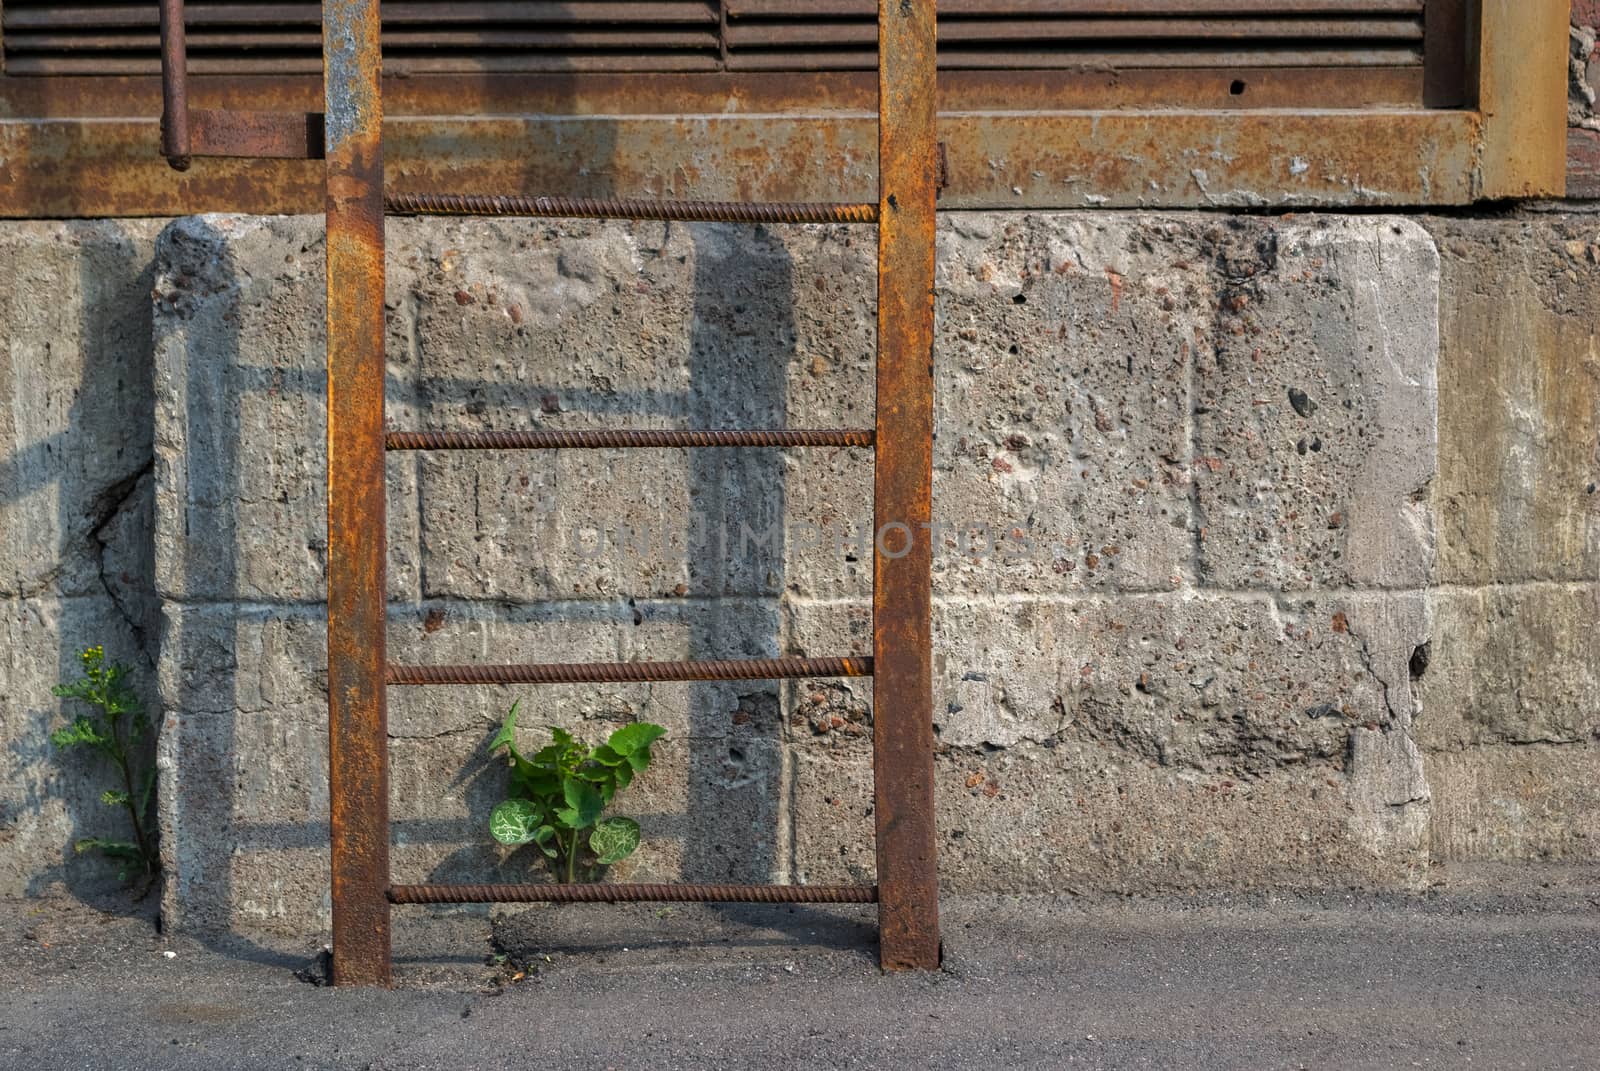 A rusty iron ladder on the background of the gray wall and shoots of green break through the asphalt.